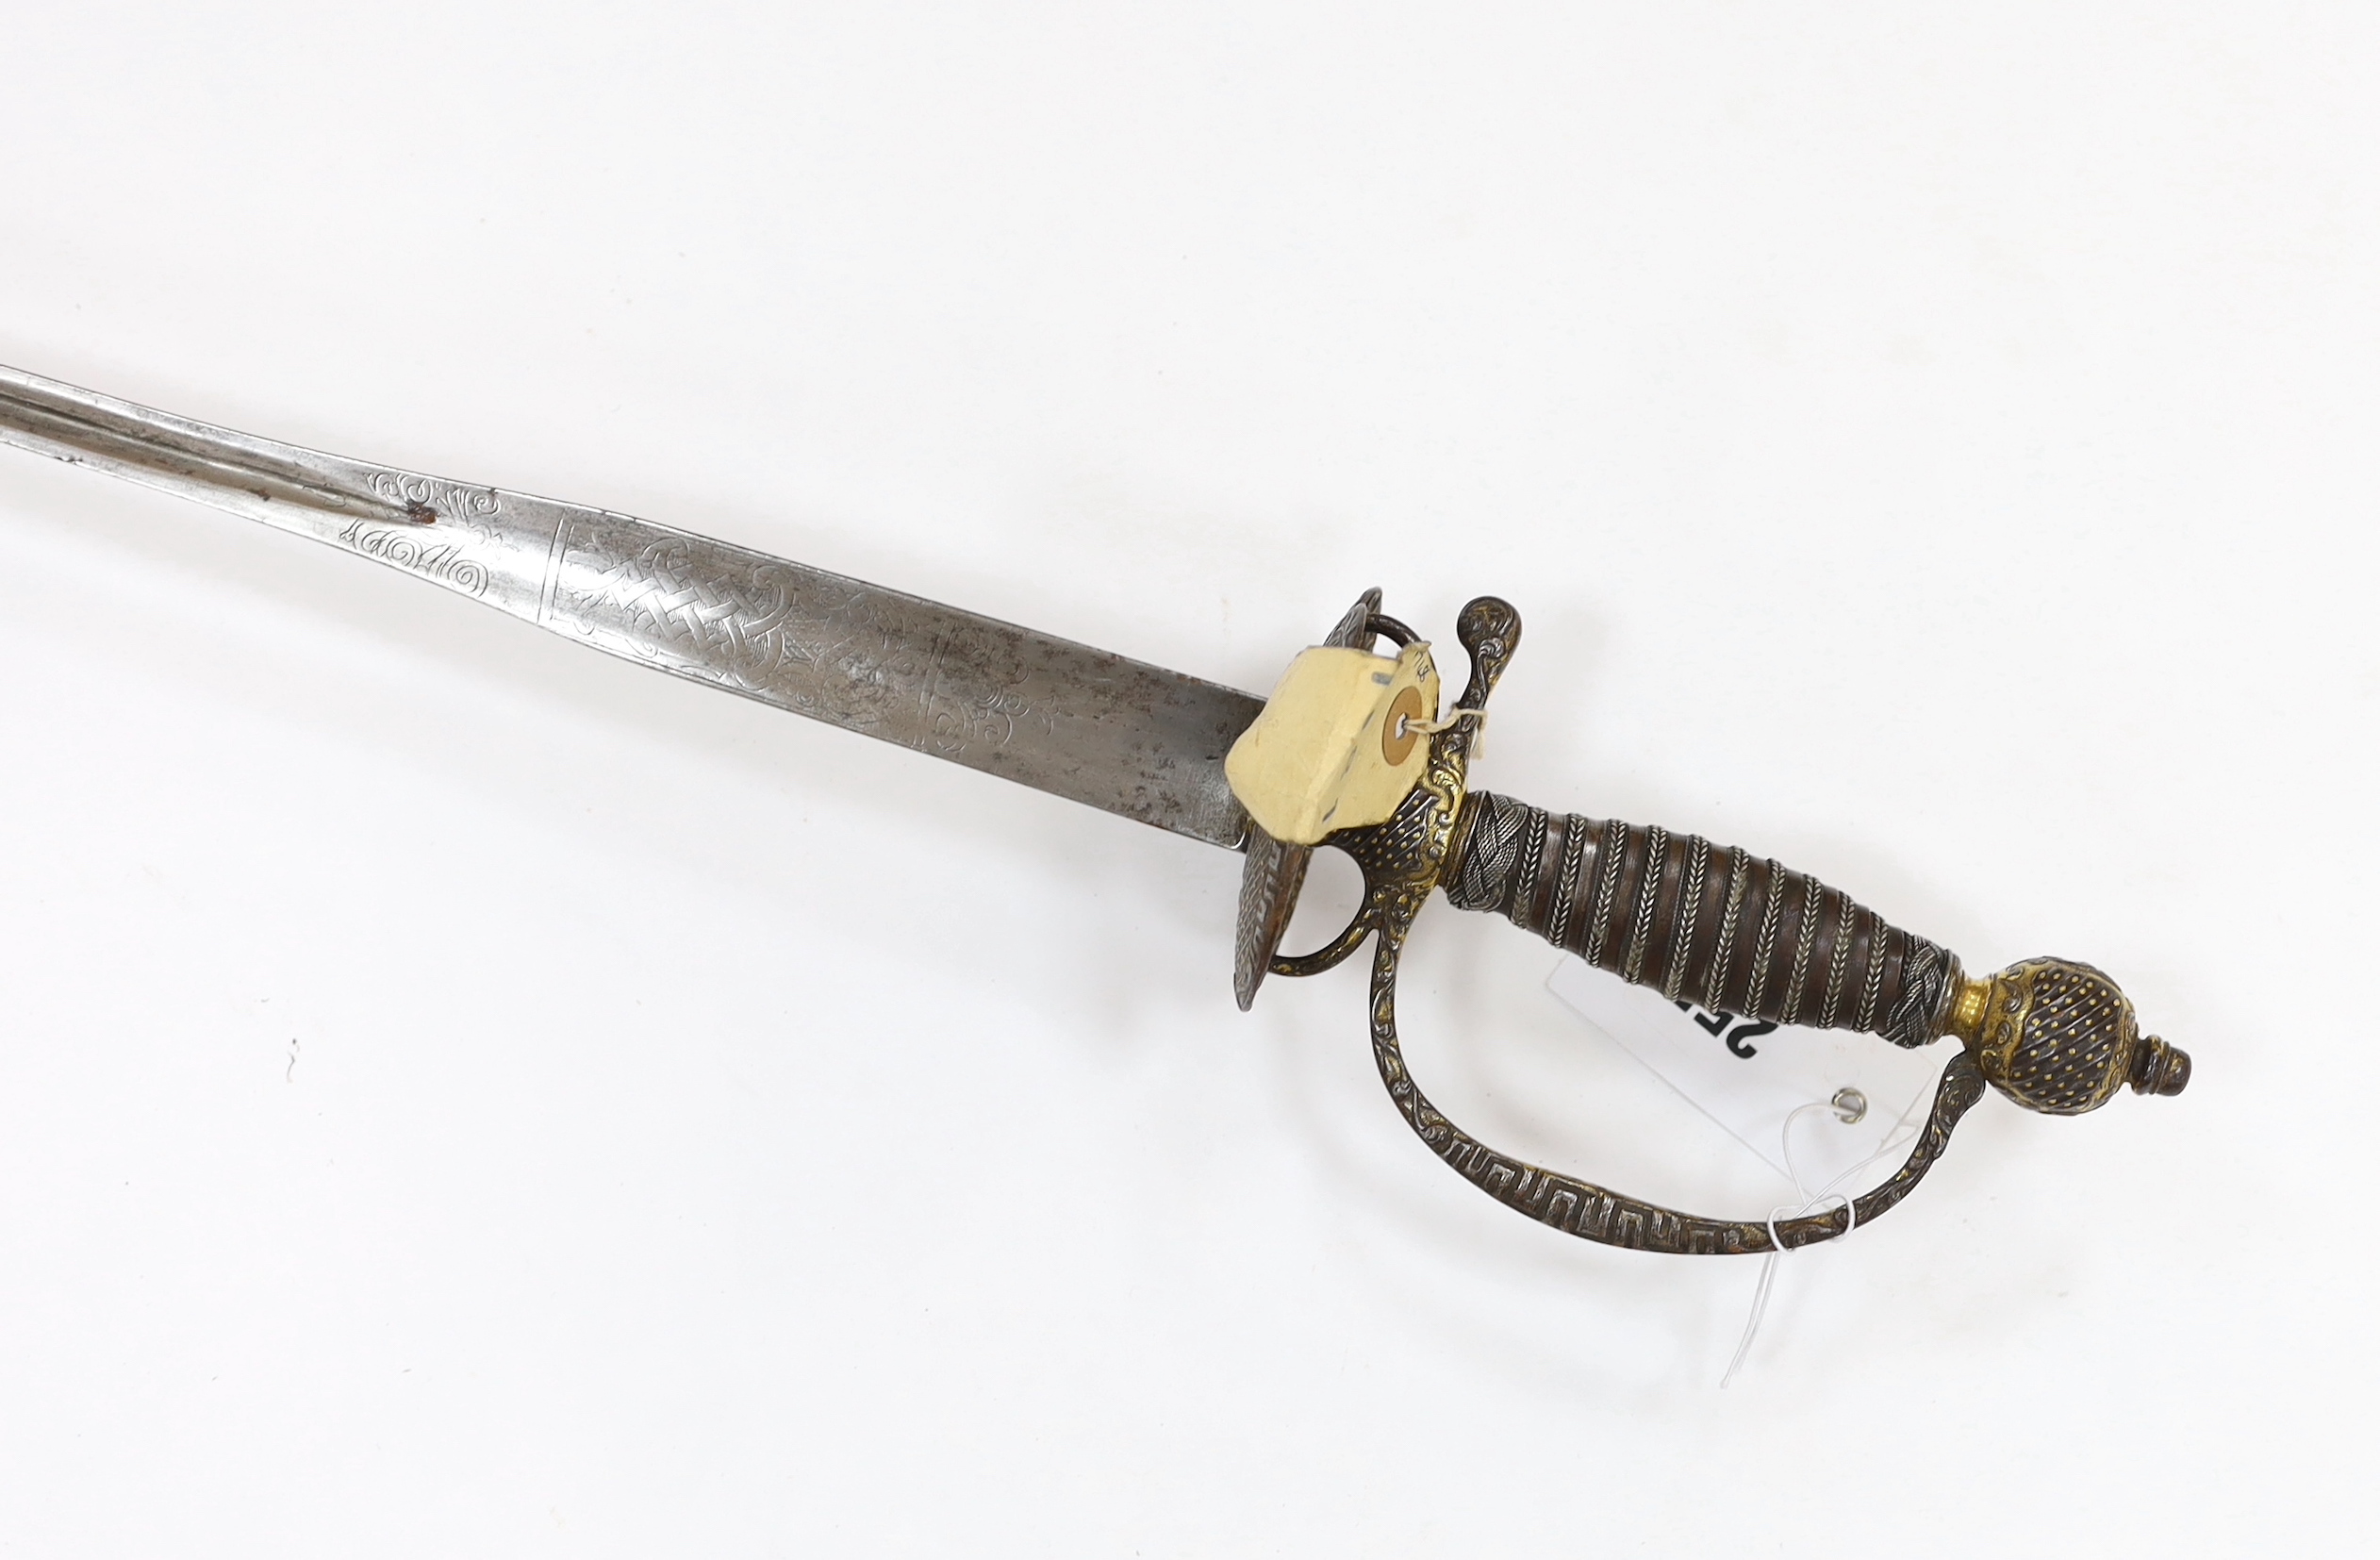 A French iron hilted small sword, hilt with flutes and tiny gold dots, the knuckle guard with key decoration, iron tape and silver wire bound grip, colichemarde blade with etched strapwork decoration, c.1770, blade 83cm